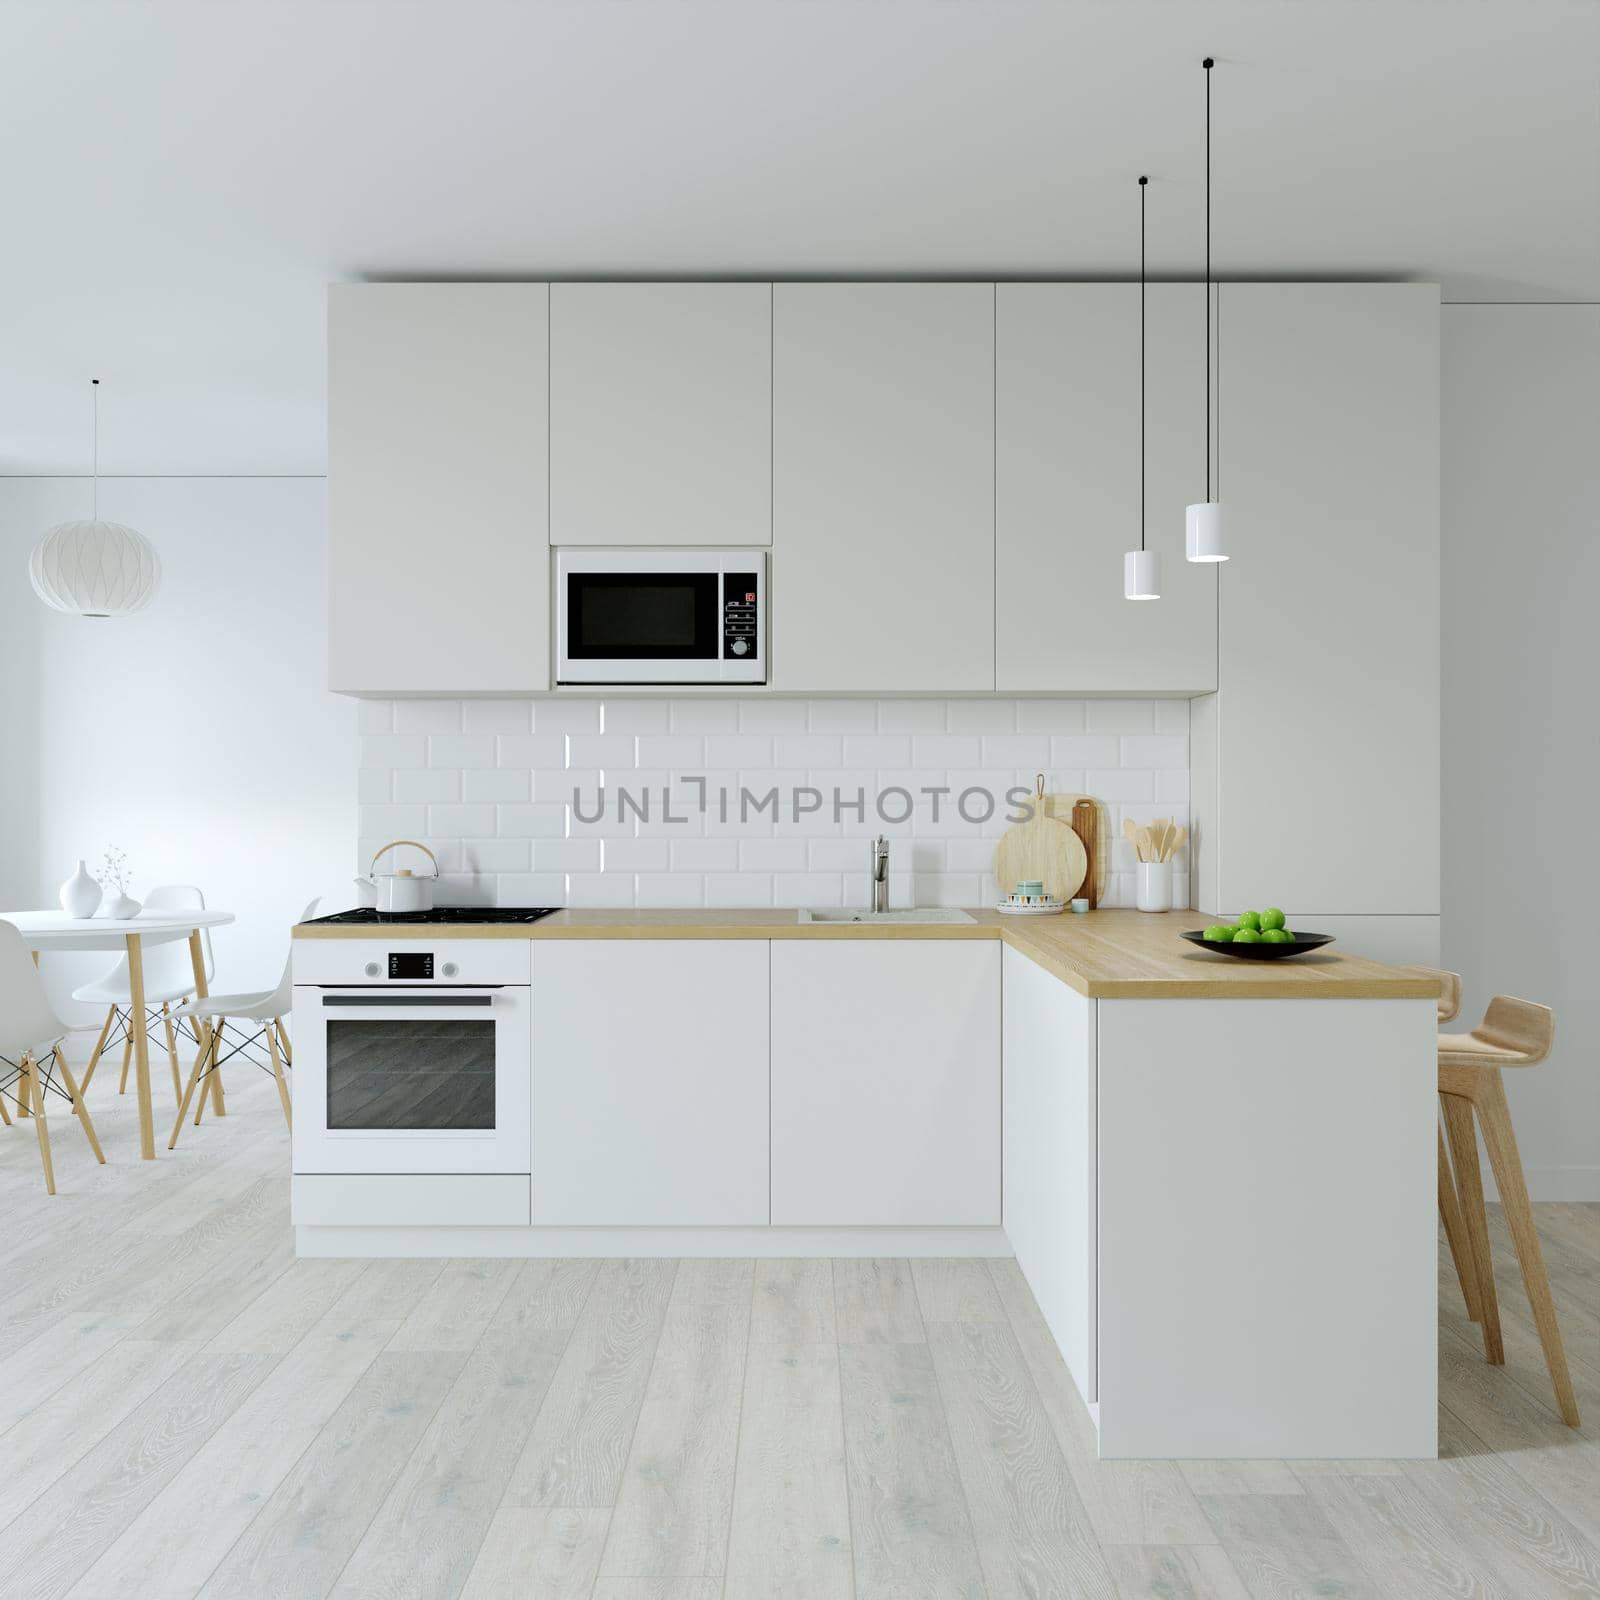 Kitchen interier. 3D rendering of a bright kitchen. Kitchen with an empty wall. Accessories for the catalog.